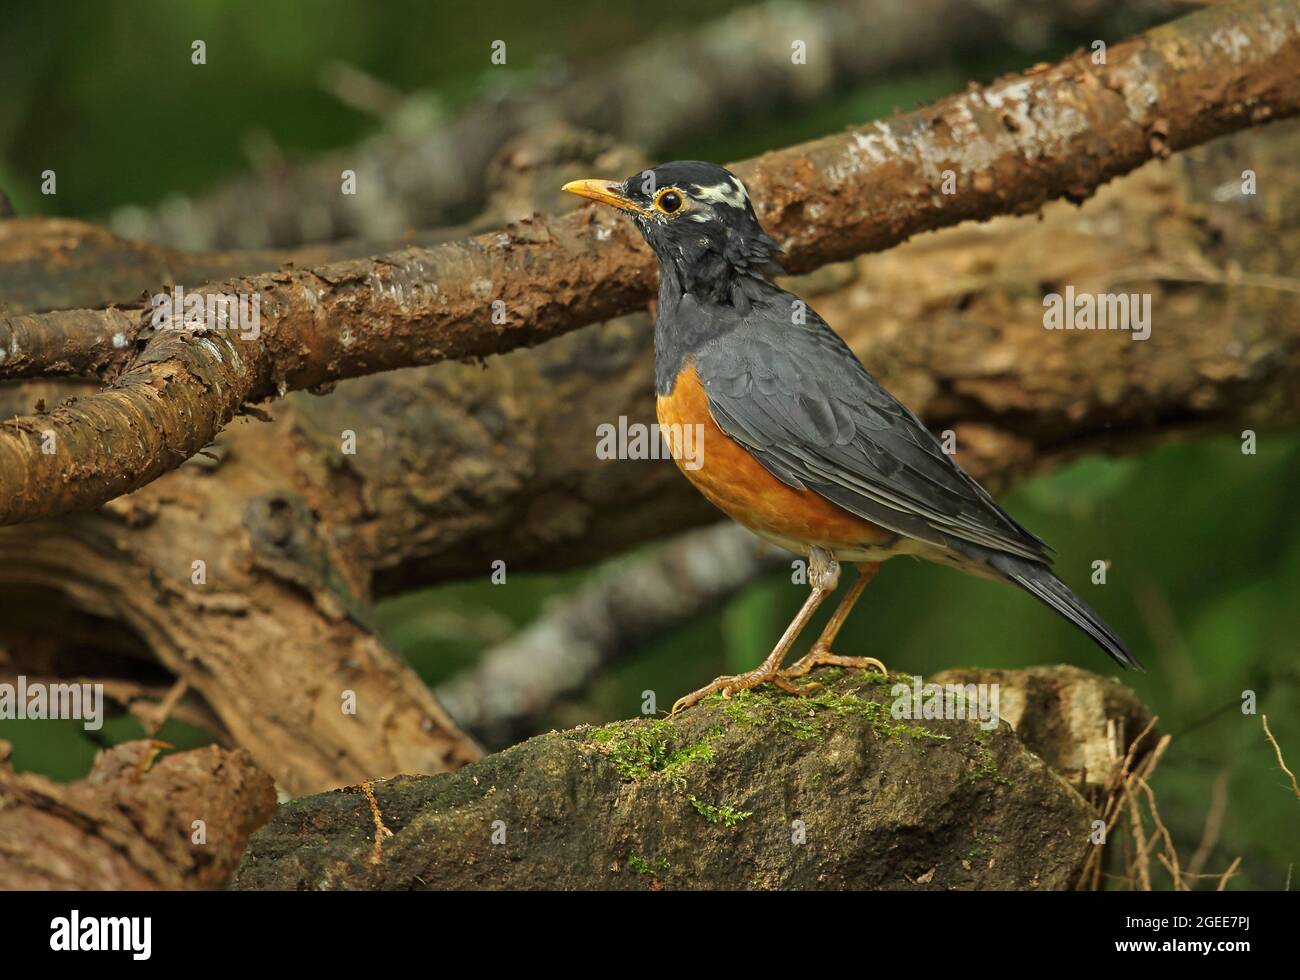 Black-breasted Thrush (Turdus dissimilis) adult male standing on rock, partially leucistic Doi Ang Khang, Thailand     November Stock Photo